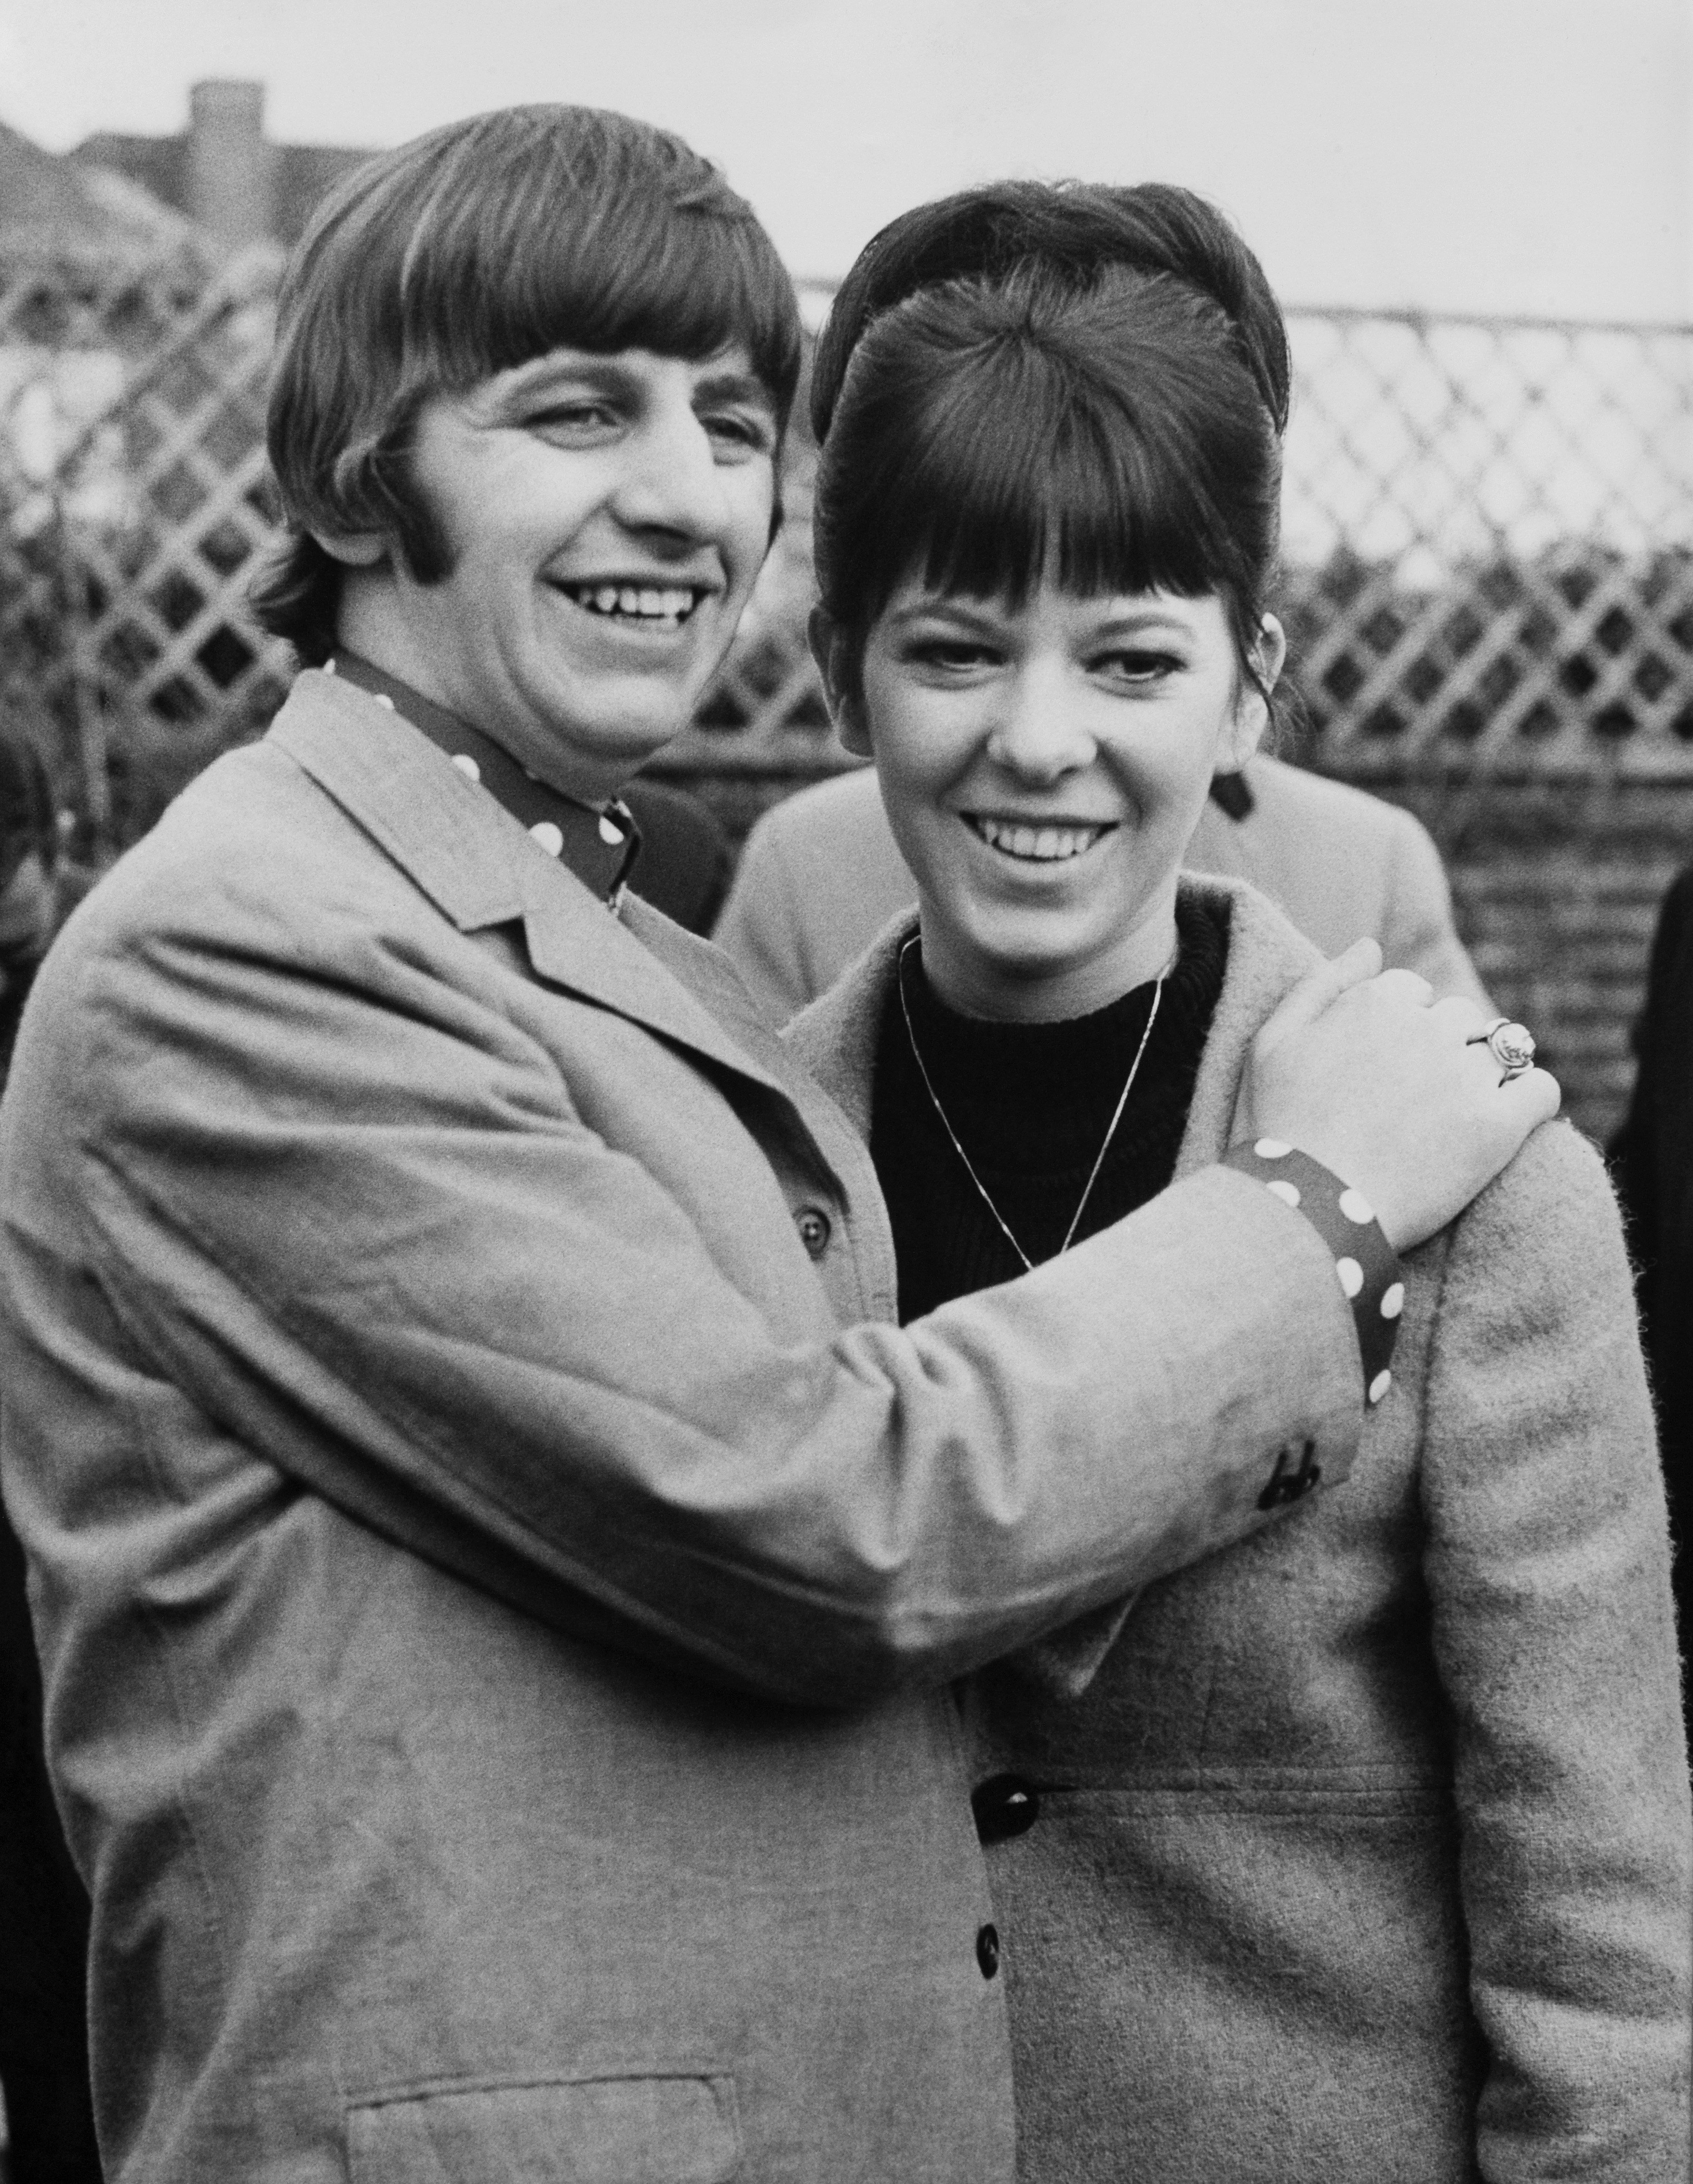 Ringo Starr And Maureen Starkey in Brighton, England On February 22, 1965 | Source: Getty Images